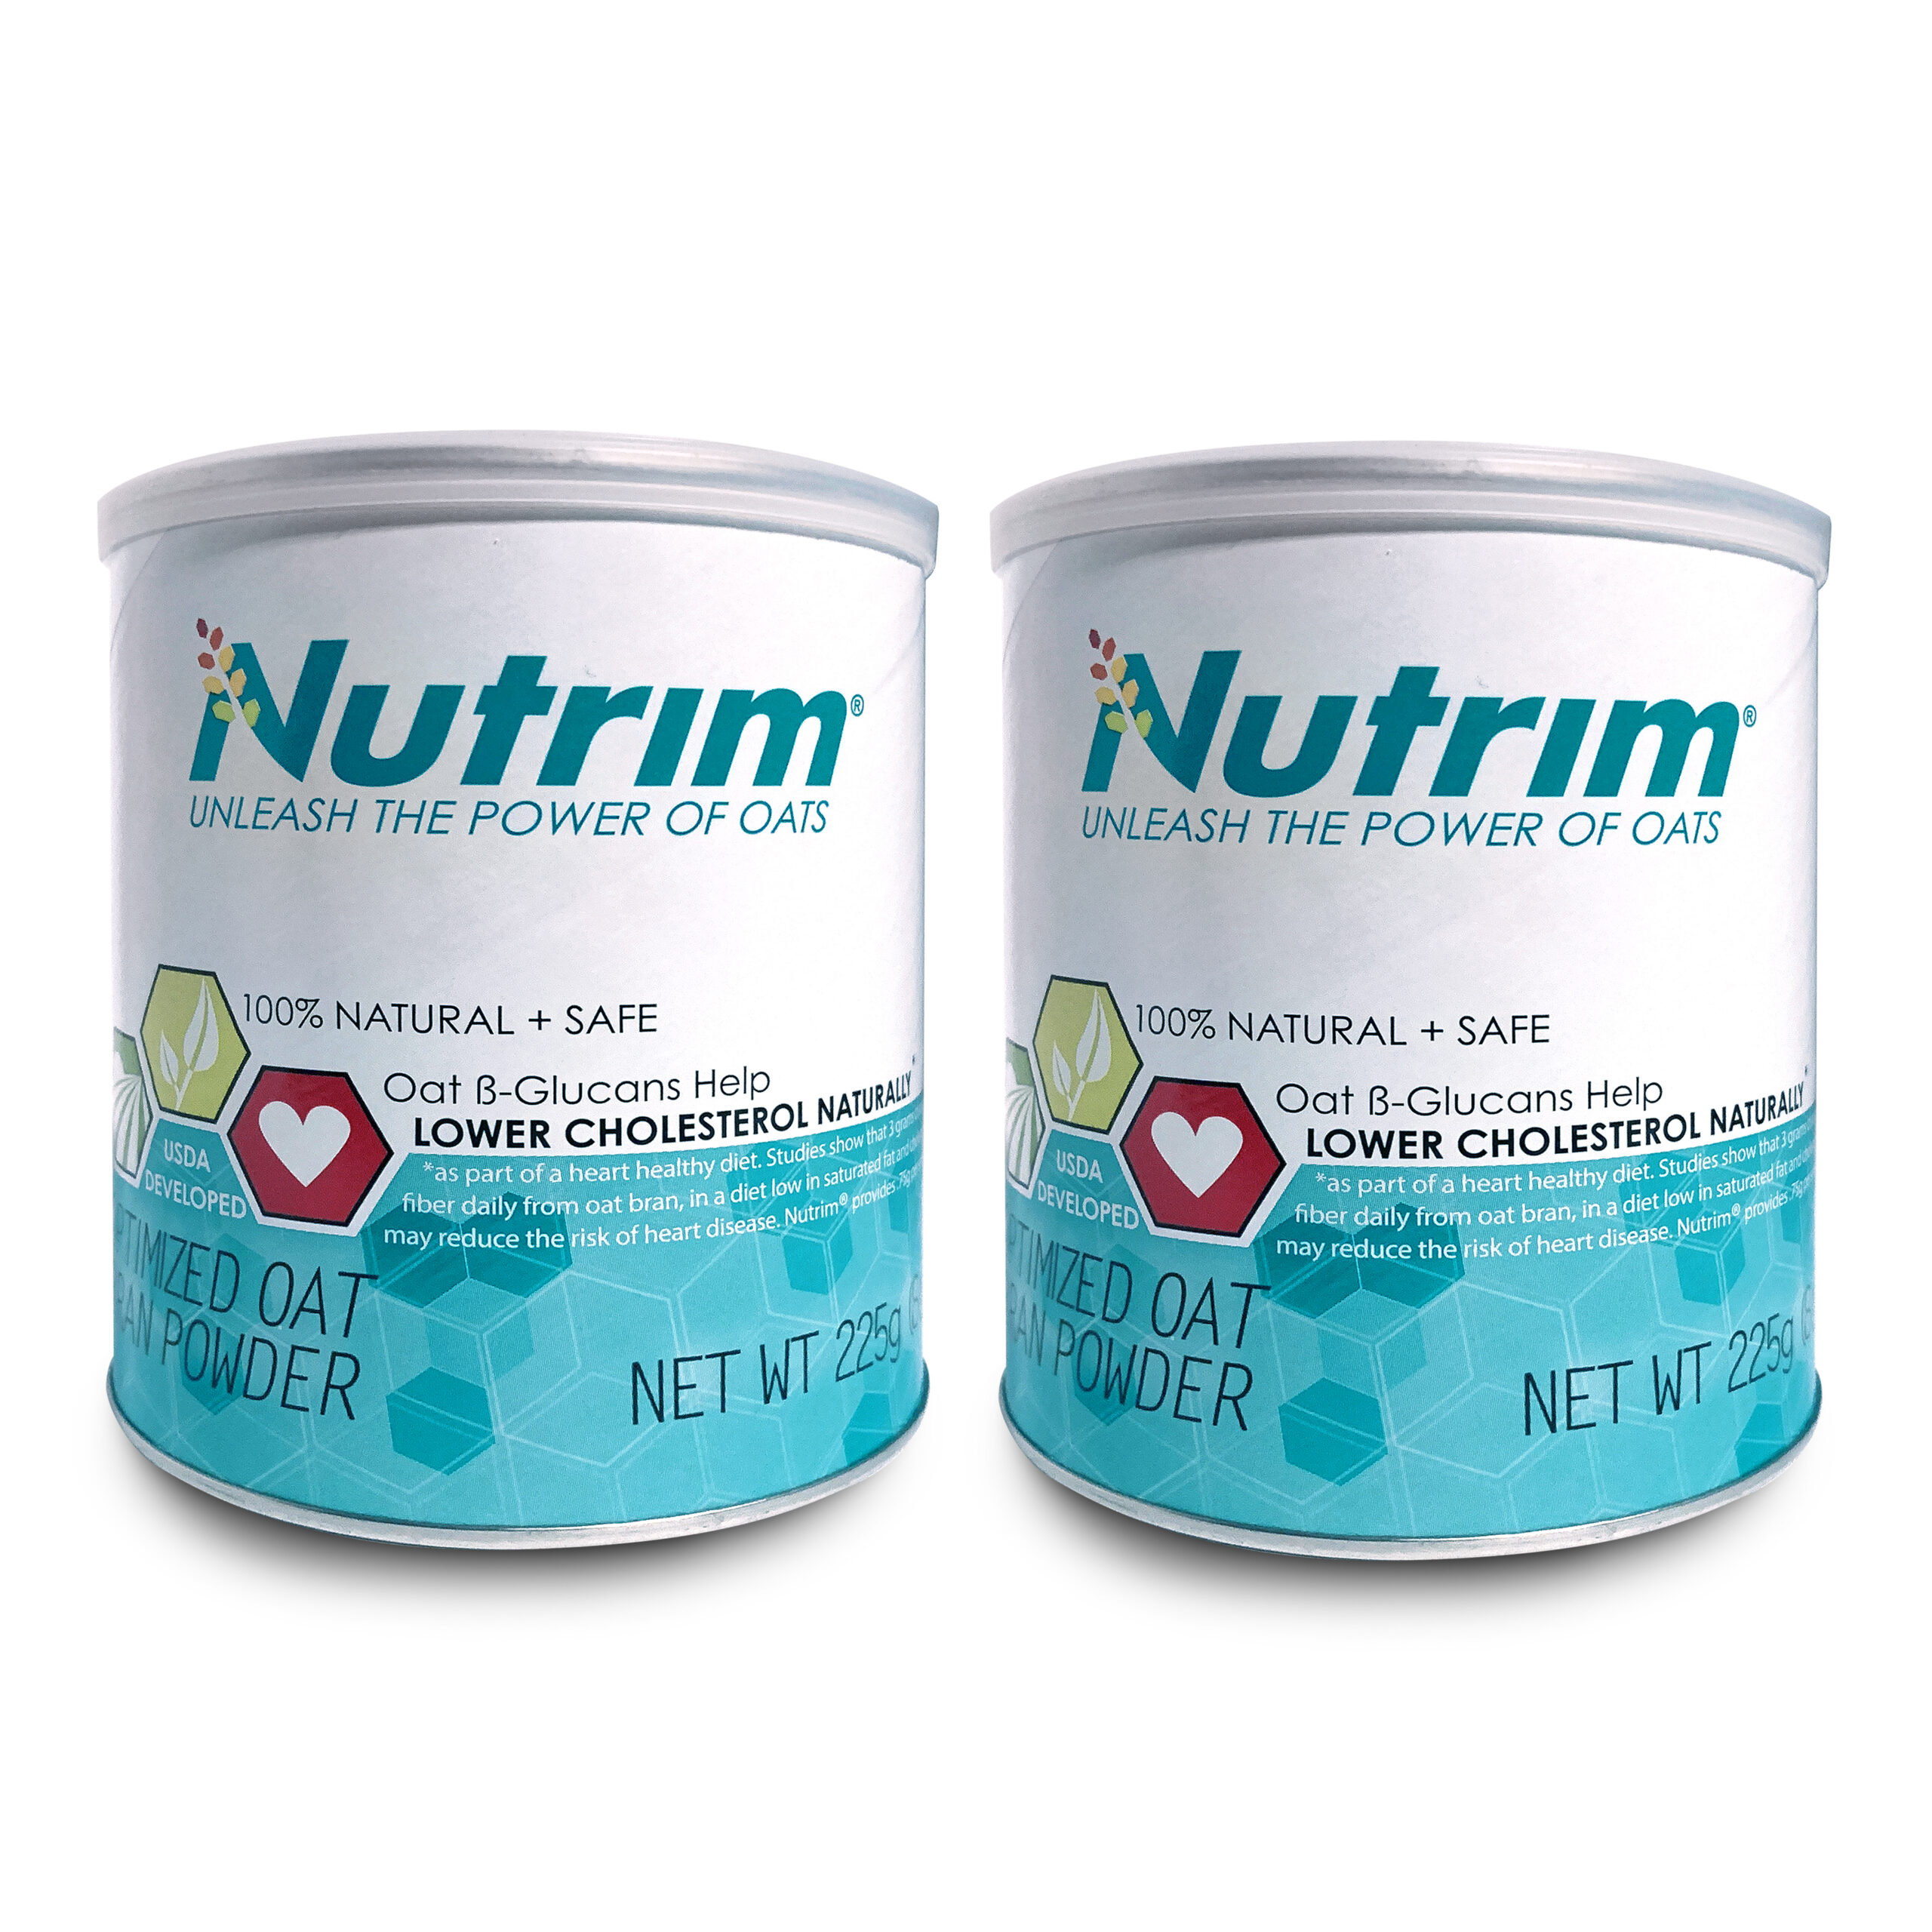 2 cans of Nutrim